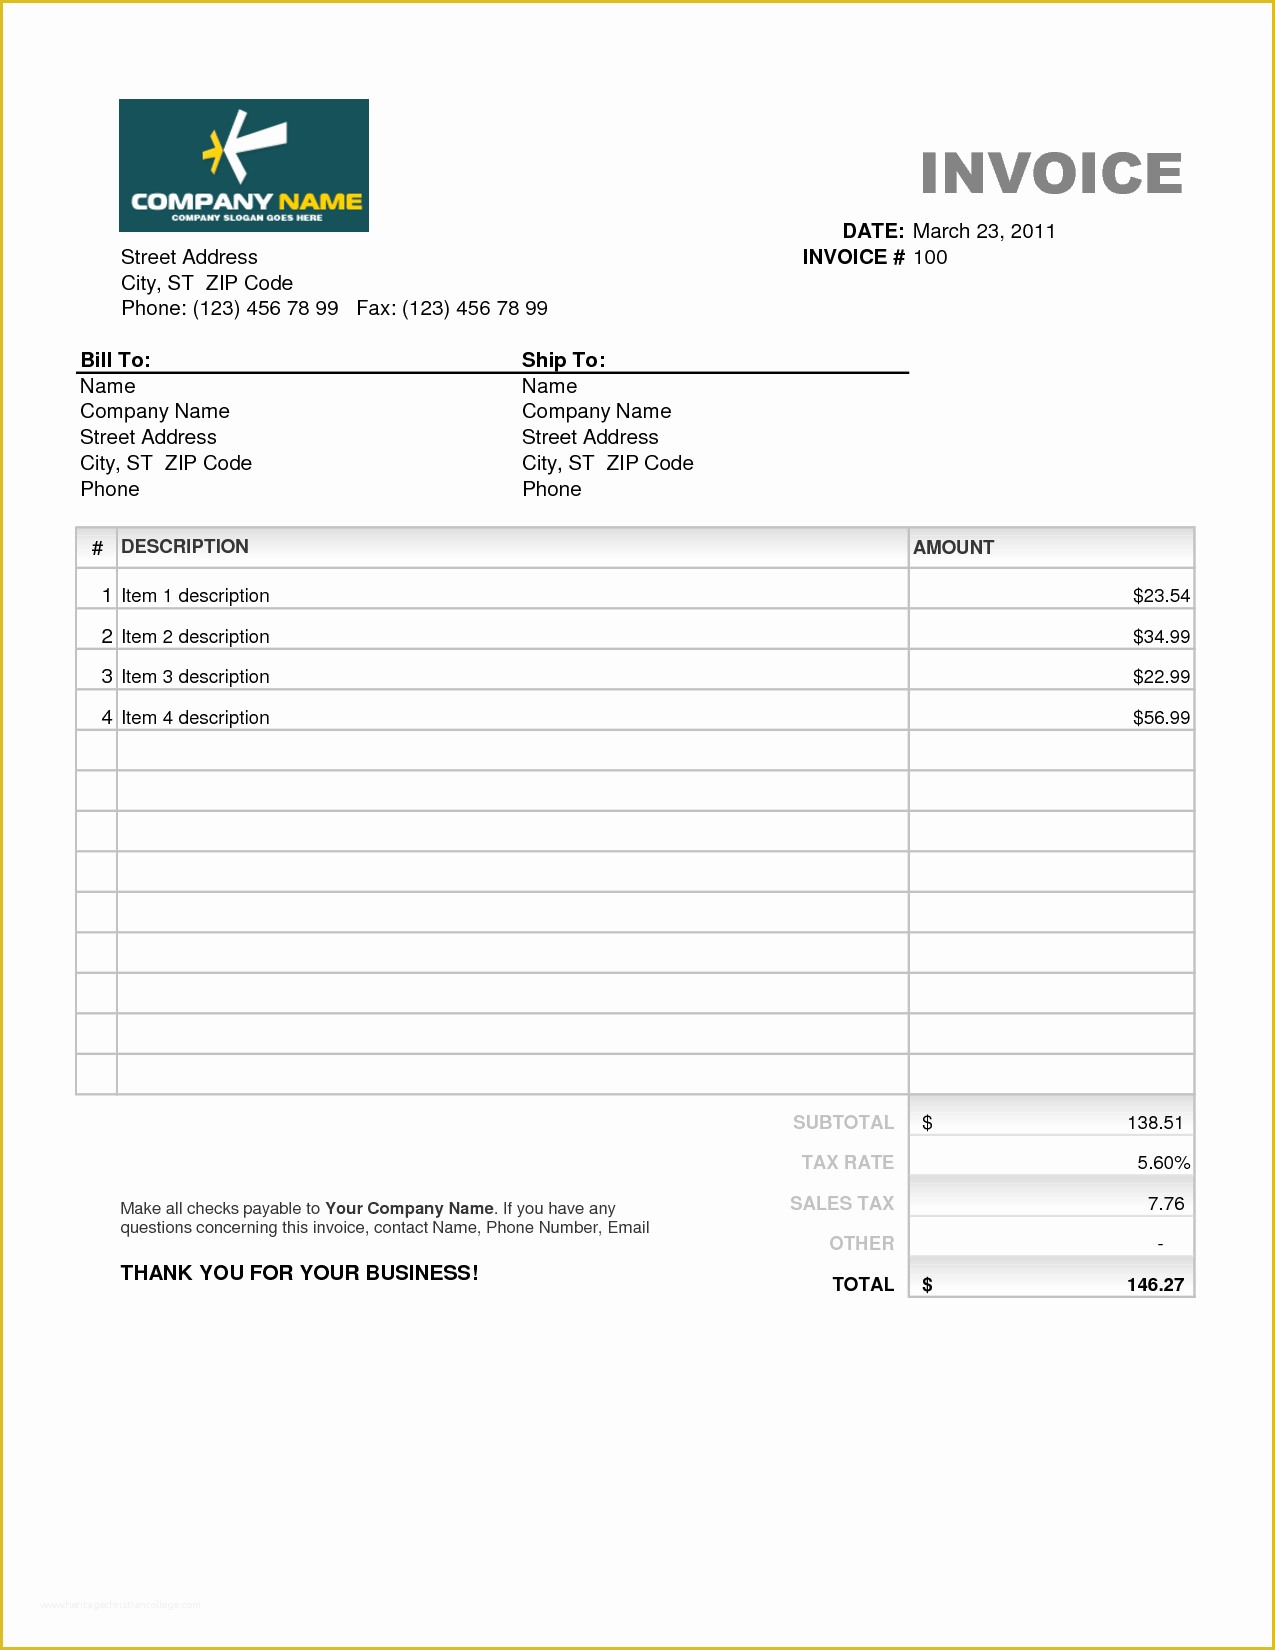 Invoice Template Mac Free Download Of Invoice Template Excel Mac